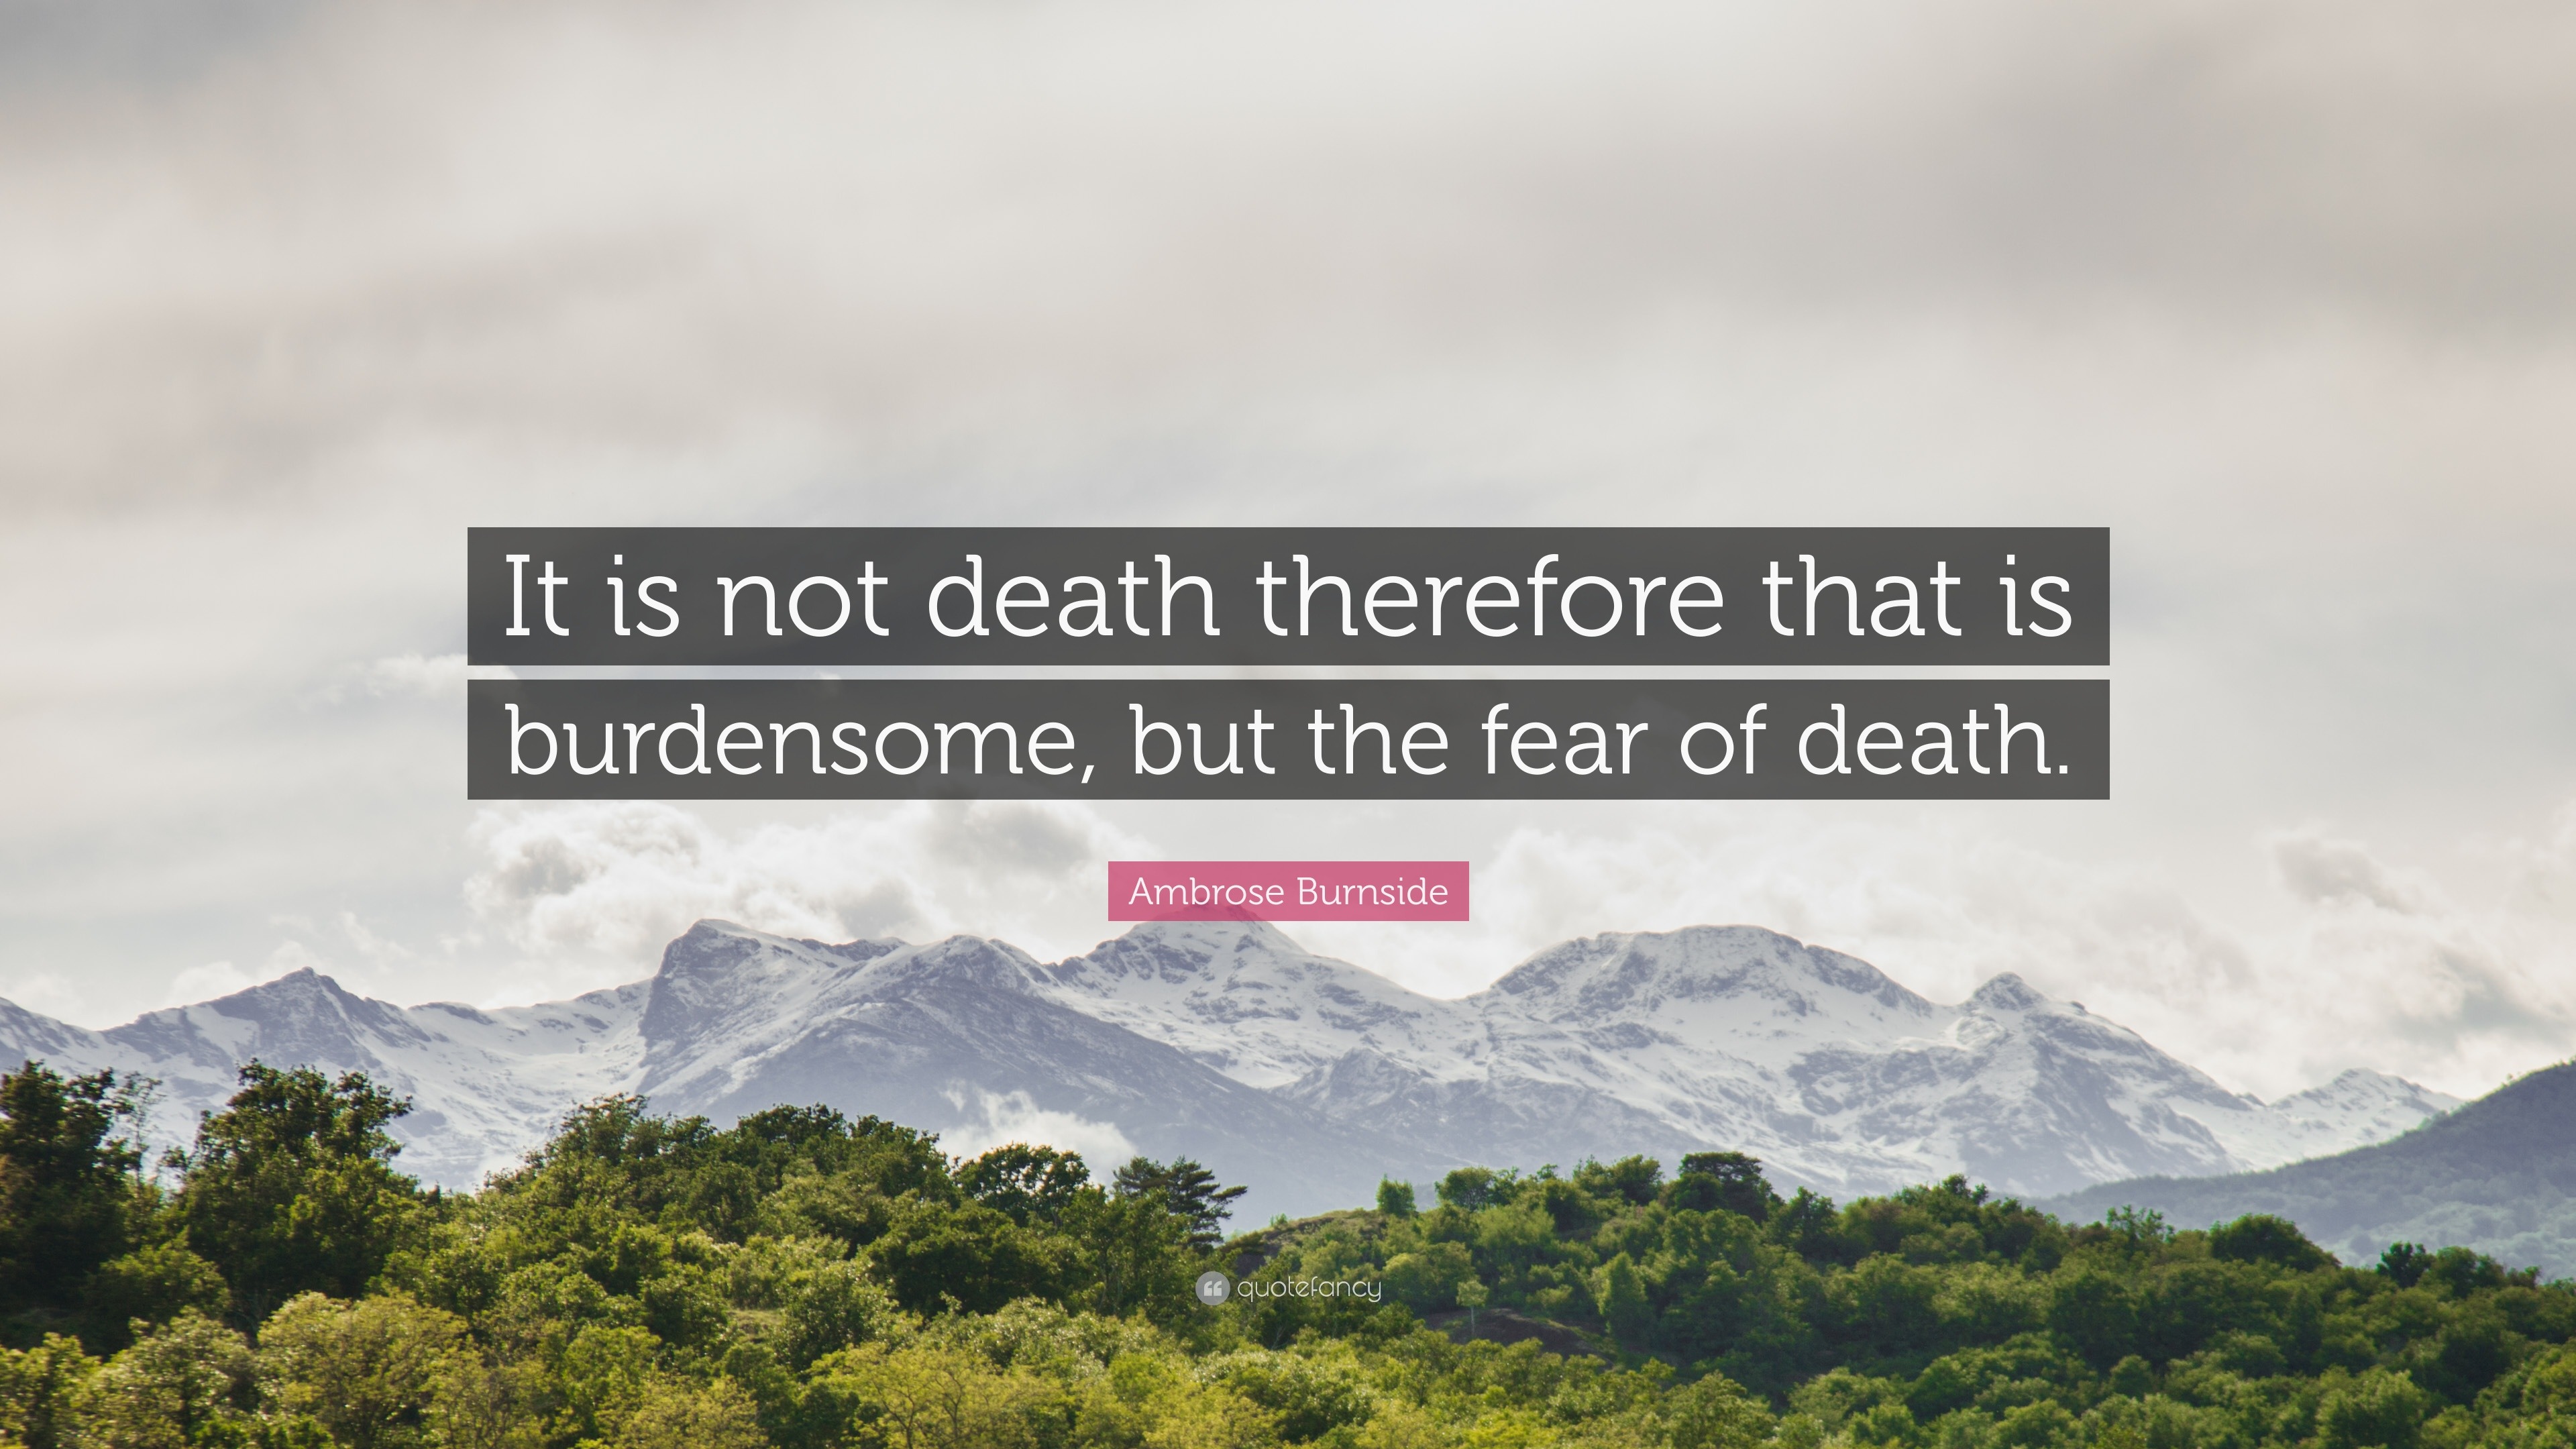 Ambrose Burnside Quote It Is Not Death Therefore That Is Burdensome But The Fear Of Death